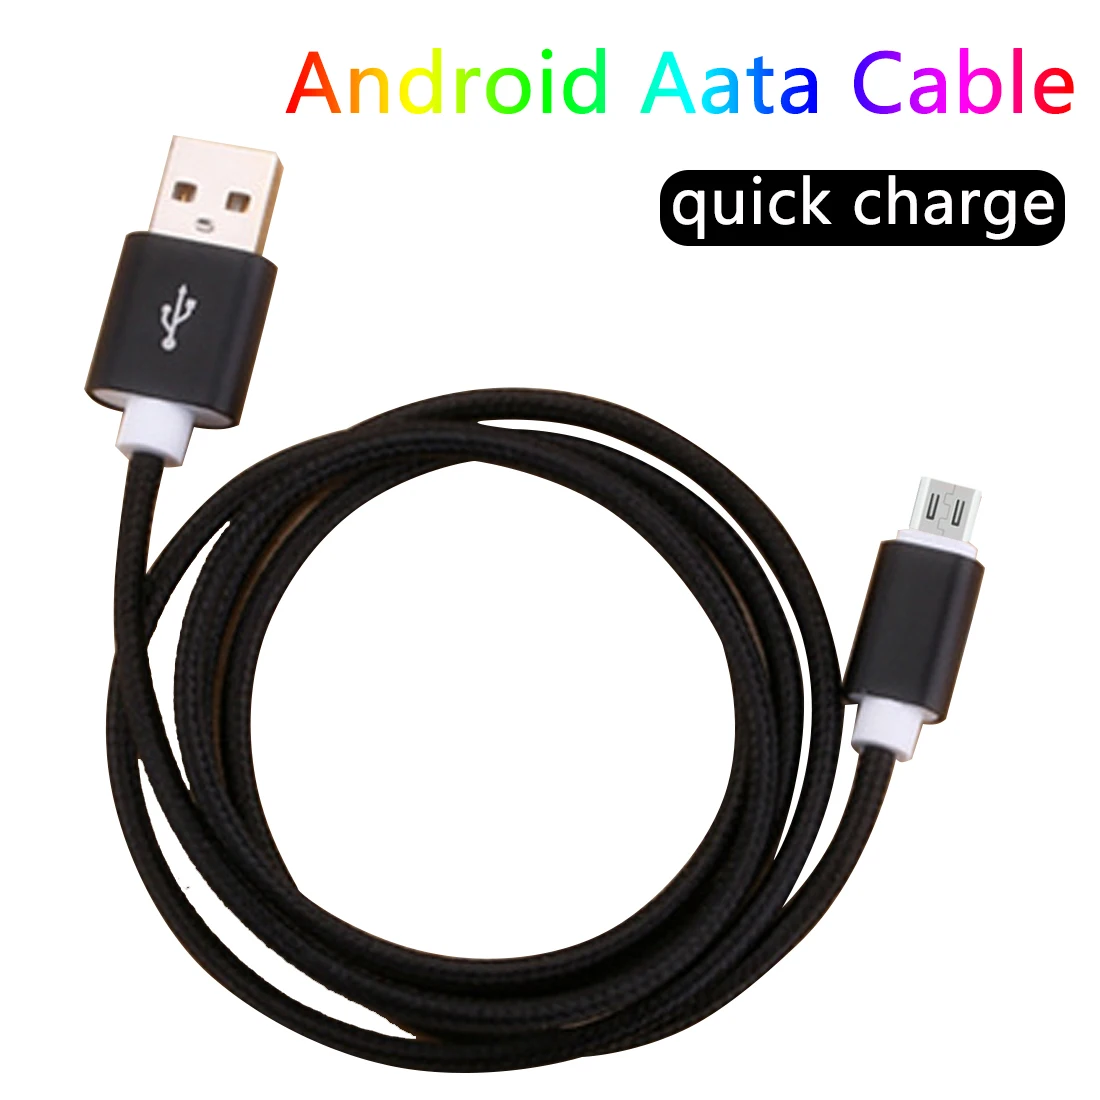 

Fast Charging USB Cables Micro USB Cable Mobile Phone Data Sync Charger Cable for Samsung A7 S7 for Android Xiaomi 1m/2m Cord